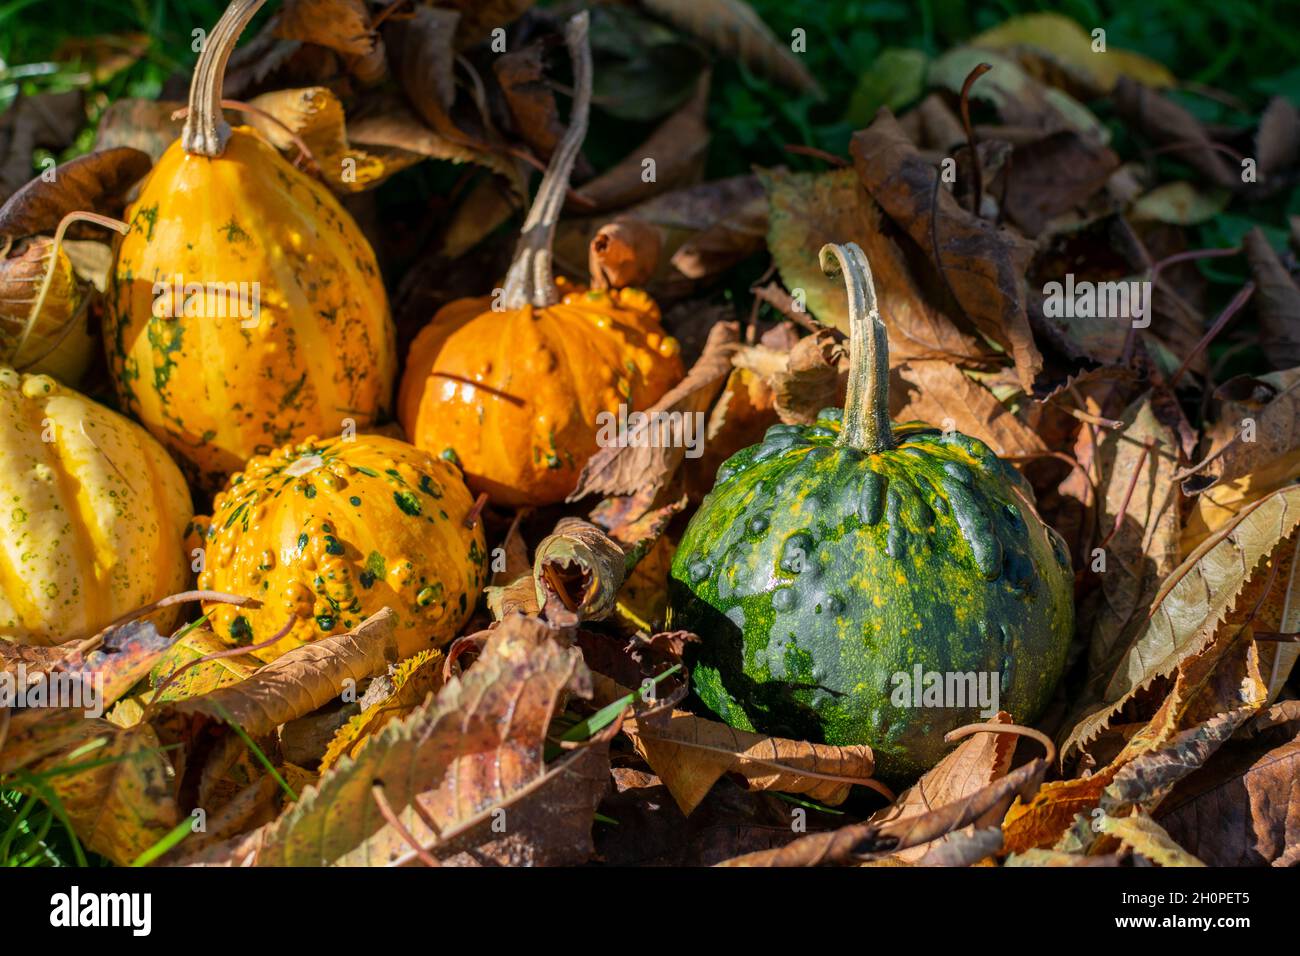 Green and yellow gourds or pumpkins covered by fall's colored leaves Stock Photo